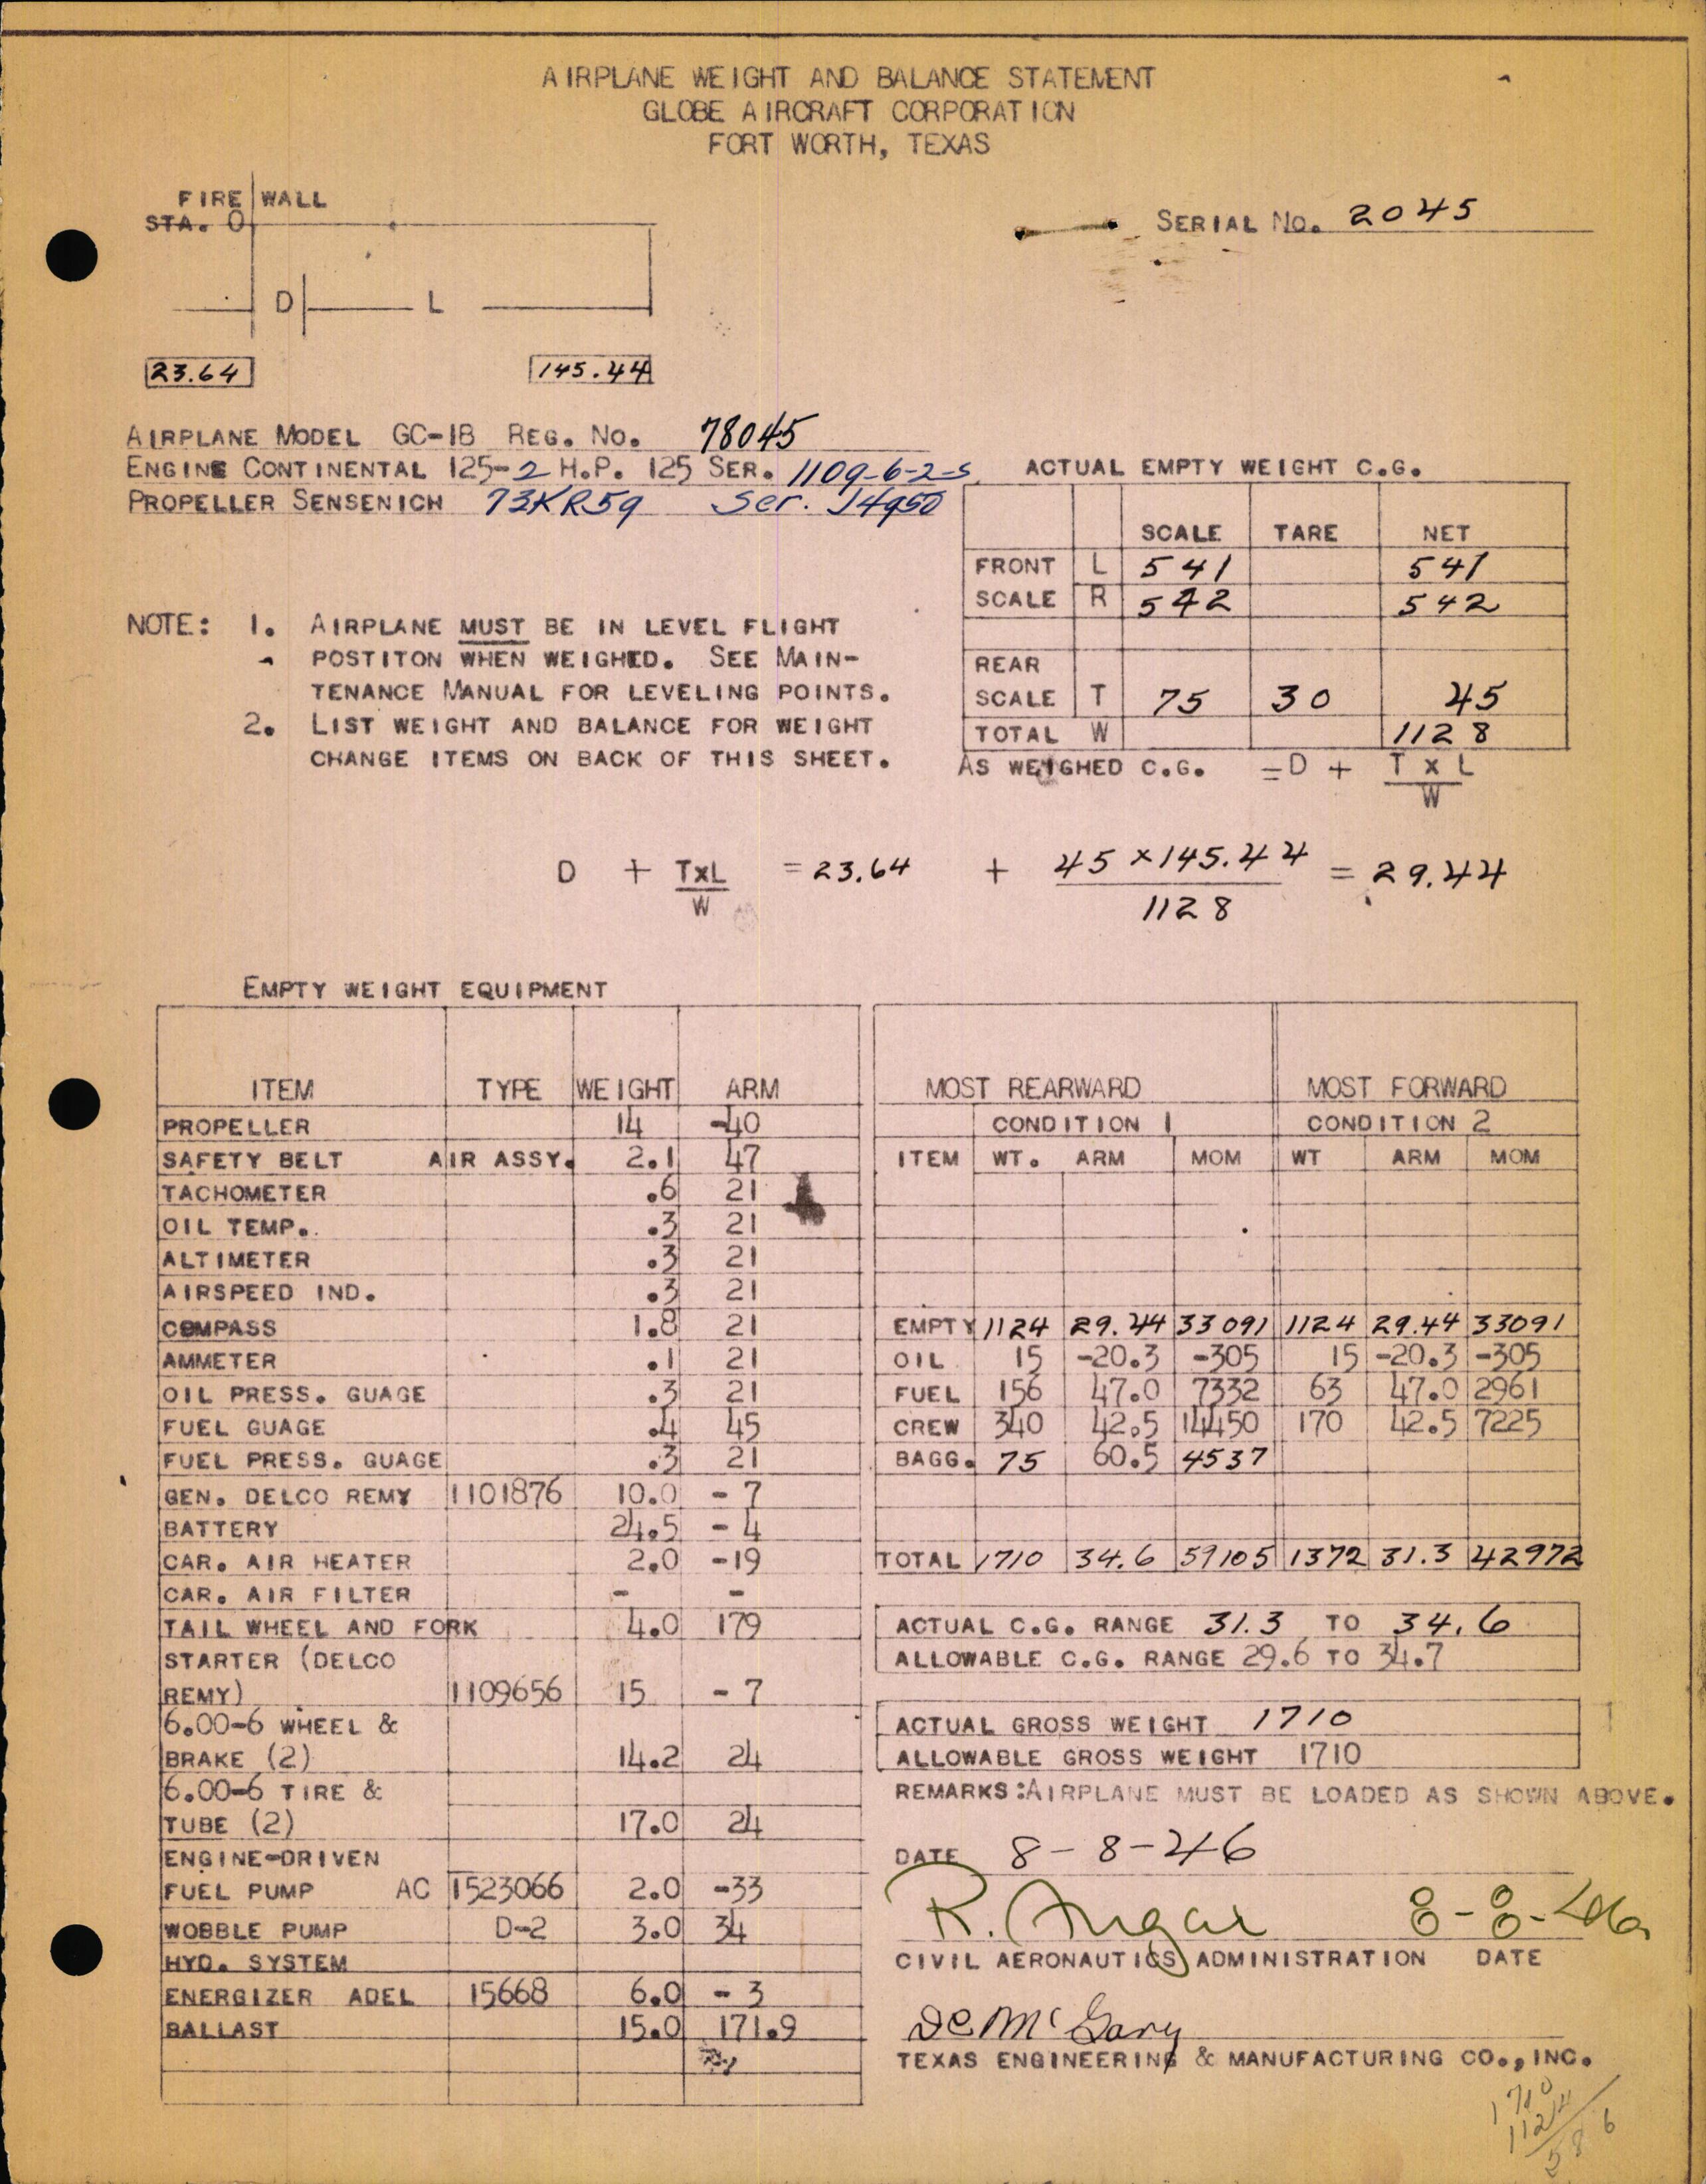 Sample page 1 from AirCorps Library document: Technical Information for Serial Number 2045